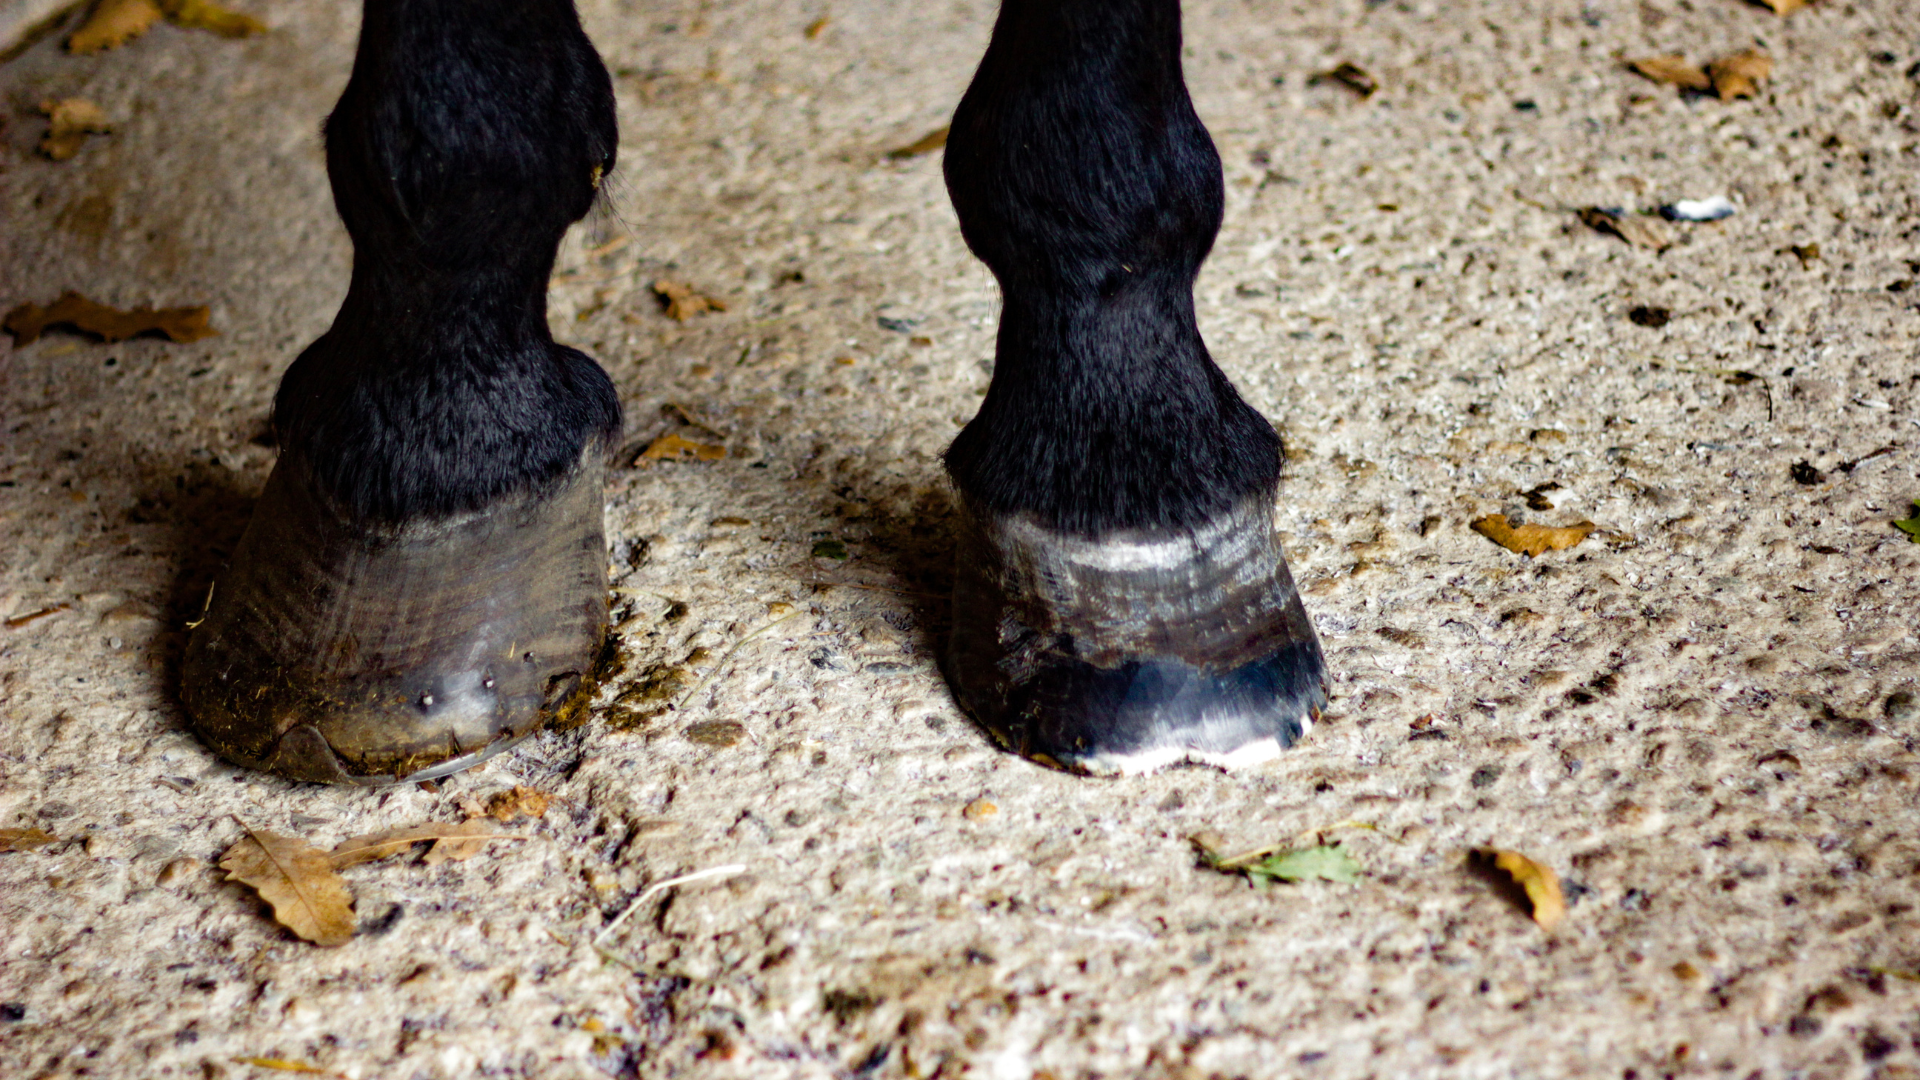 Ringbone in Horses: What You Need to Know